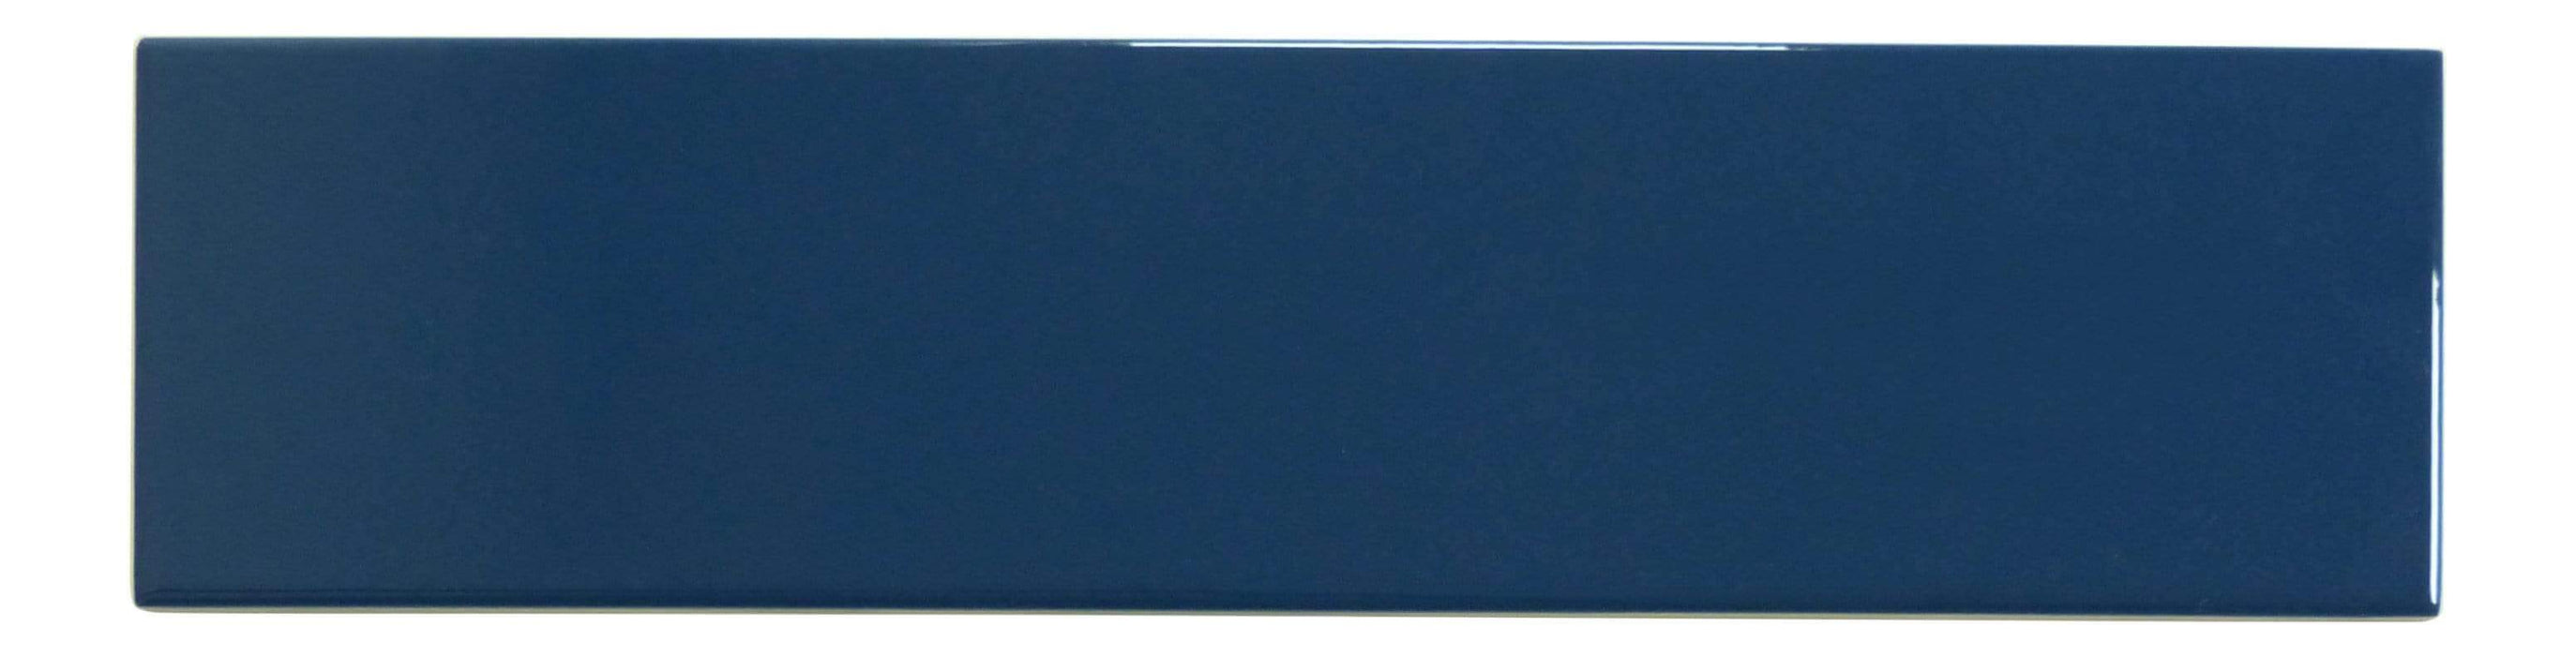 In Collection Plain Blue 3" x 12" Glossy Ceramic Subway Tile Euro Glass